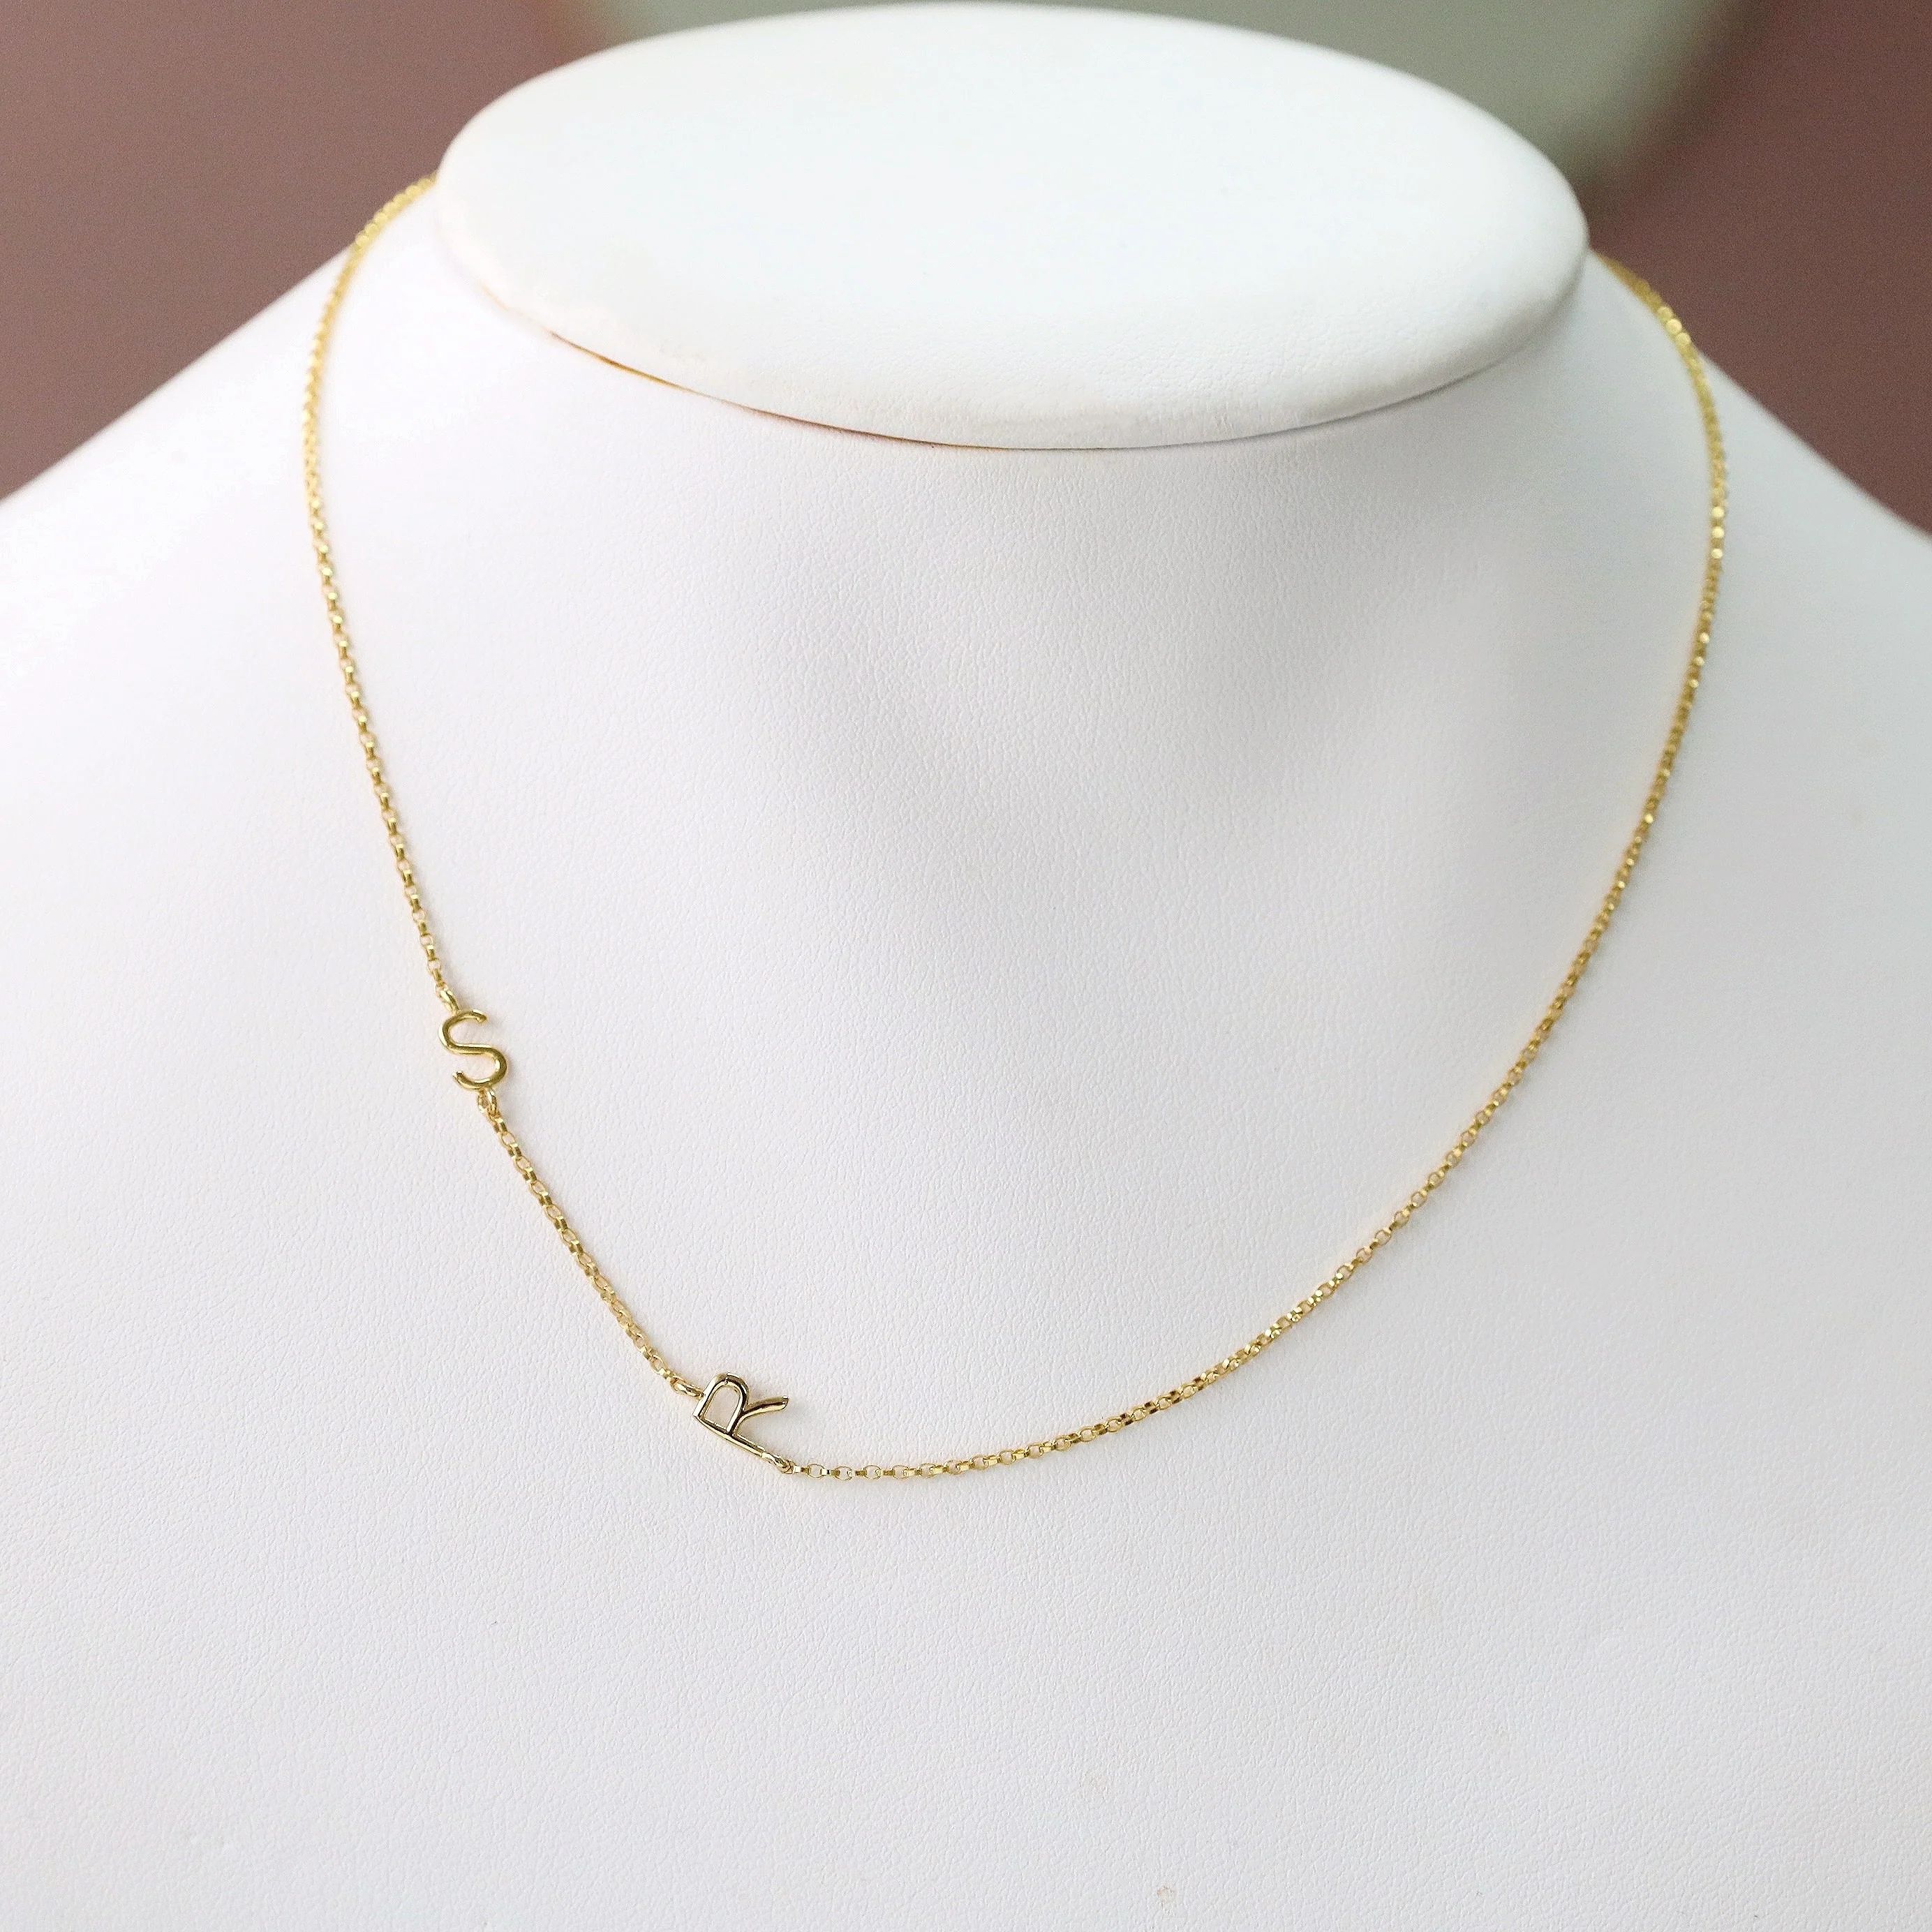 Little Darling Necklace by Tenley Leopold | Taudrey